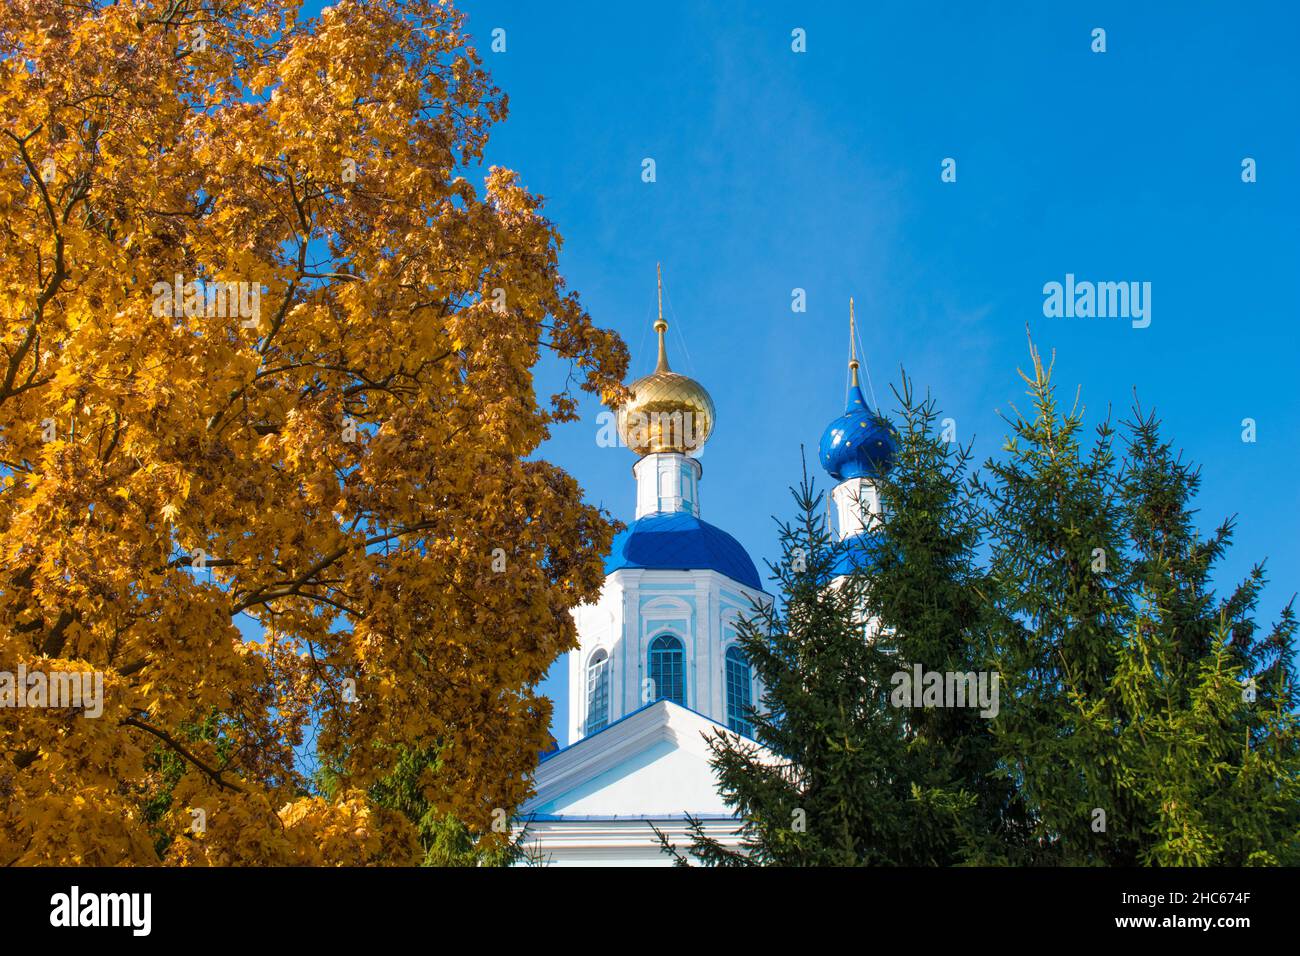 Two domes of the church with the cross with blue sky on the background in Tambov, Russia Stock Photo